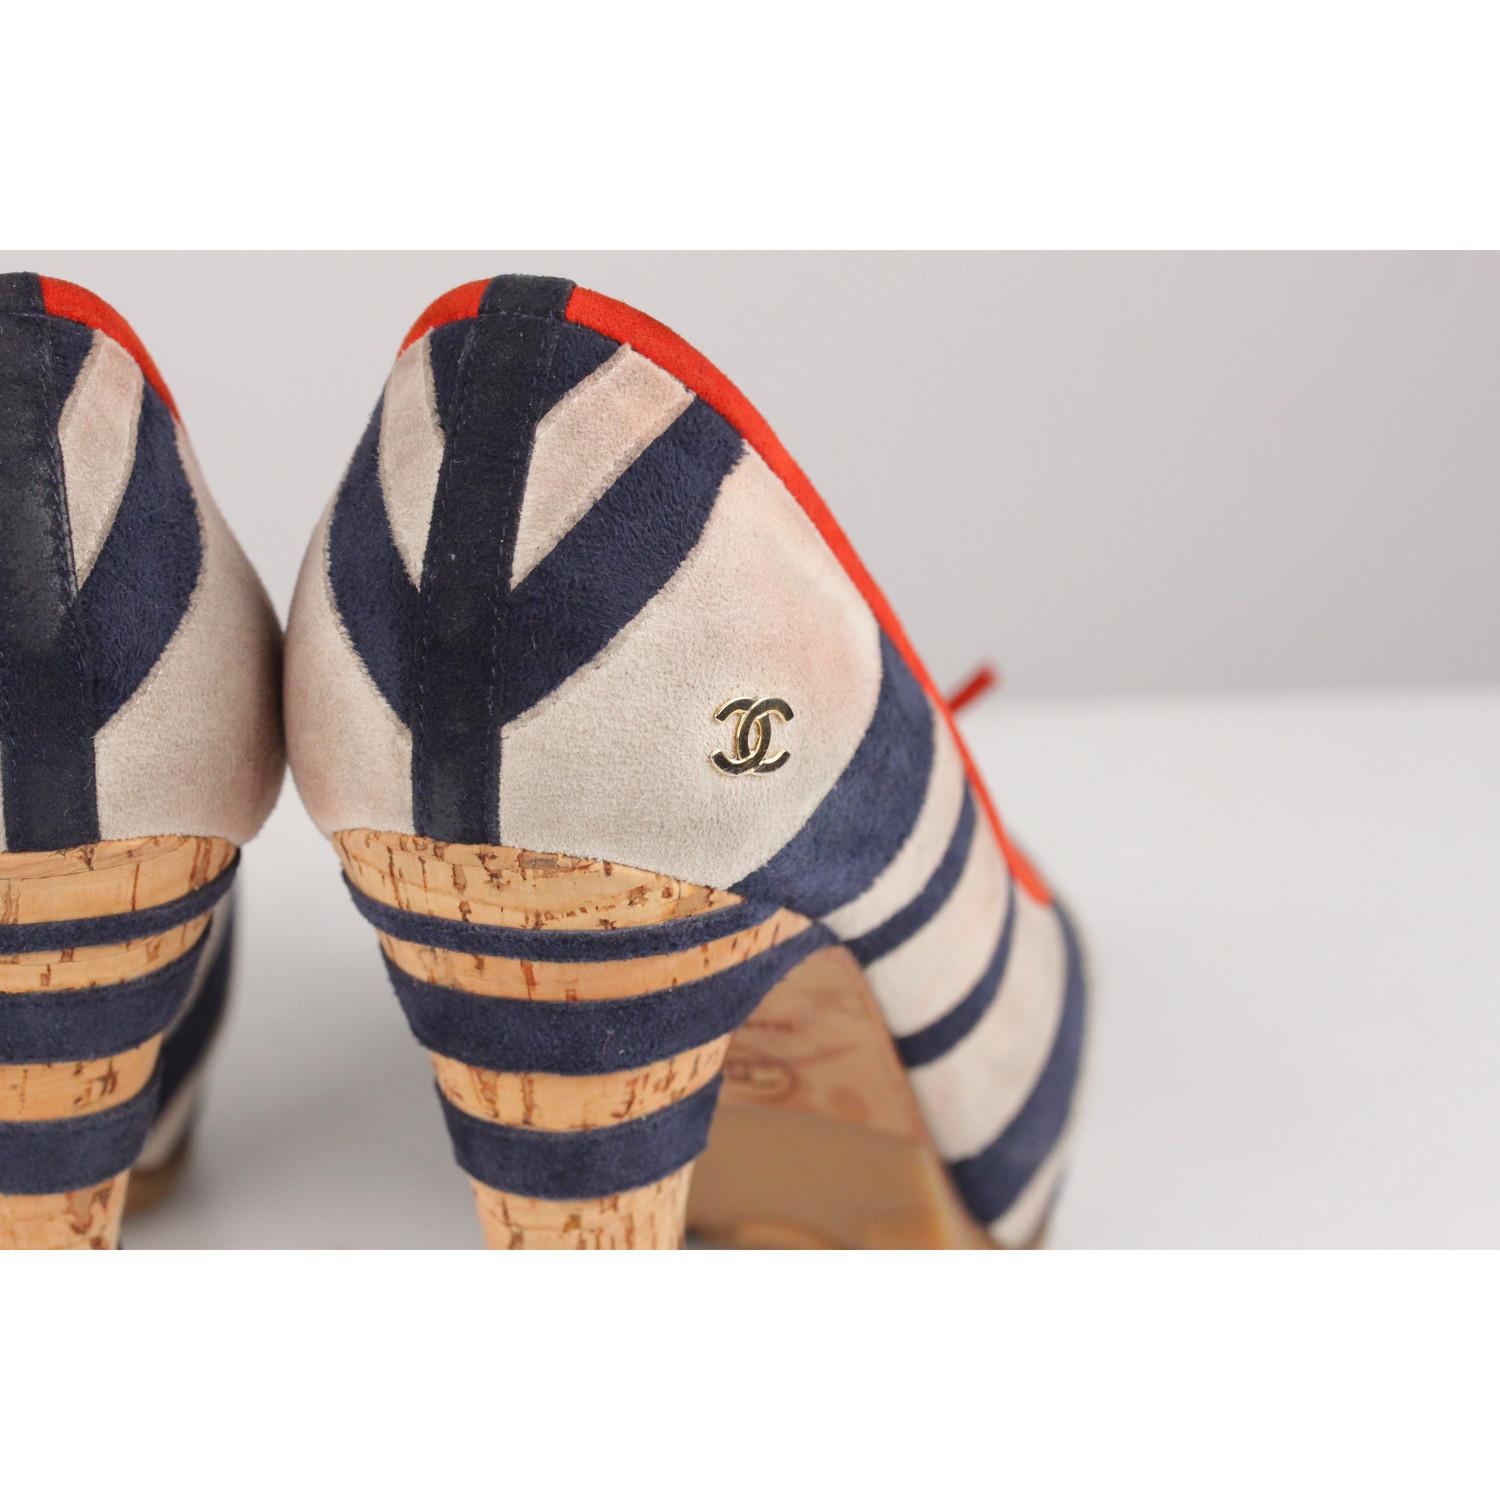 Women's Chanel Red Navy White Suede Striped Pumps Heels Size 36.5